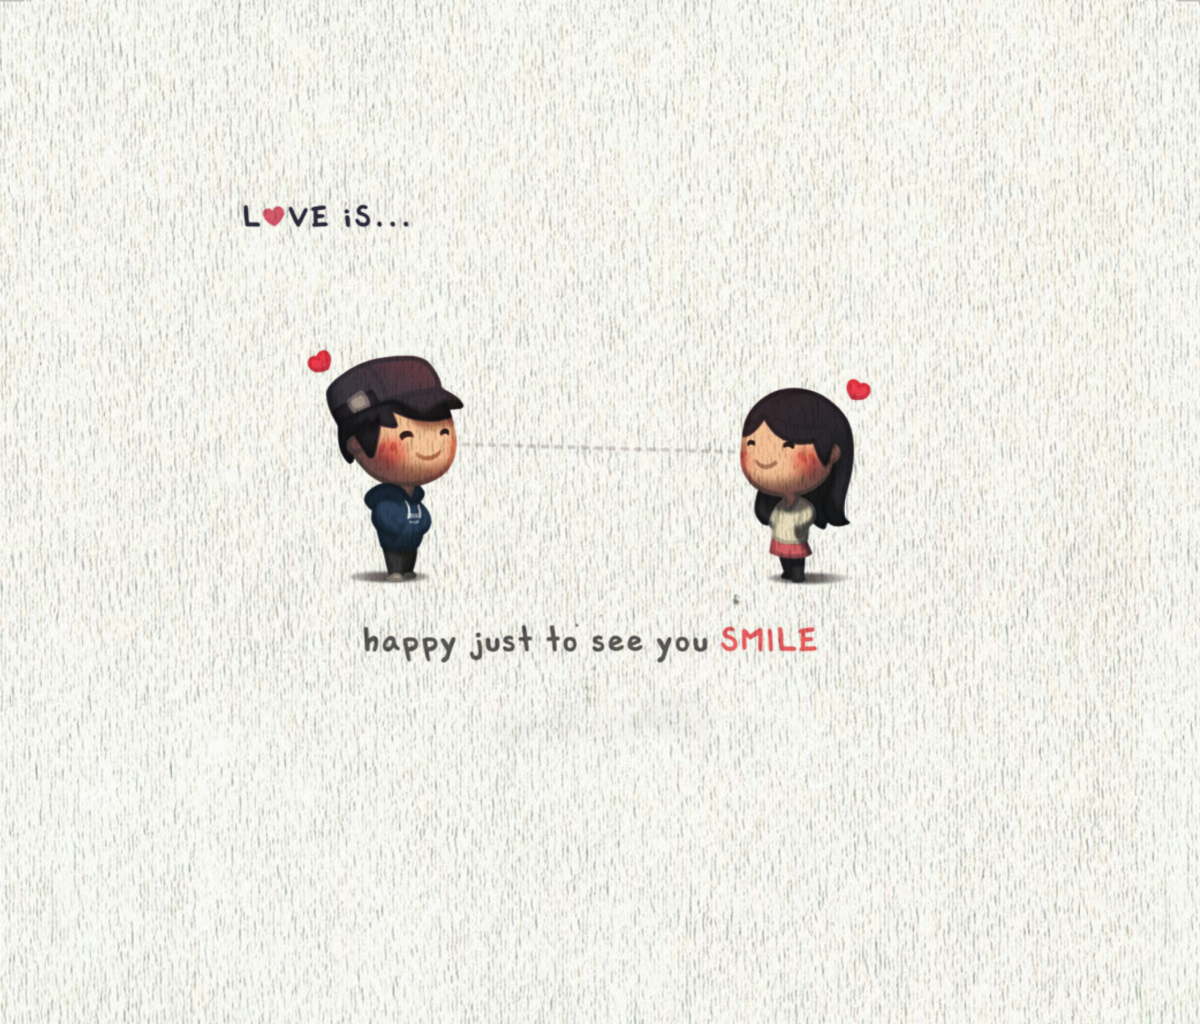 Das Love Is Happy Just To See You Smile Wallpaper 1200x1024